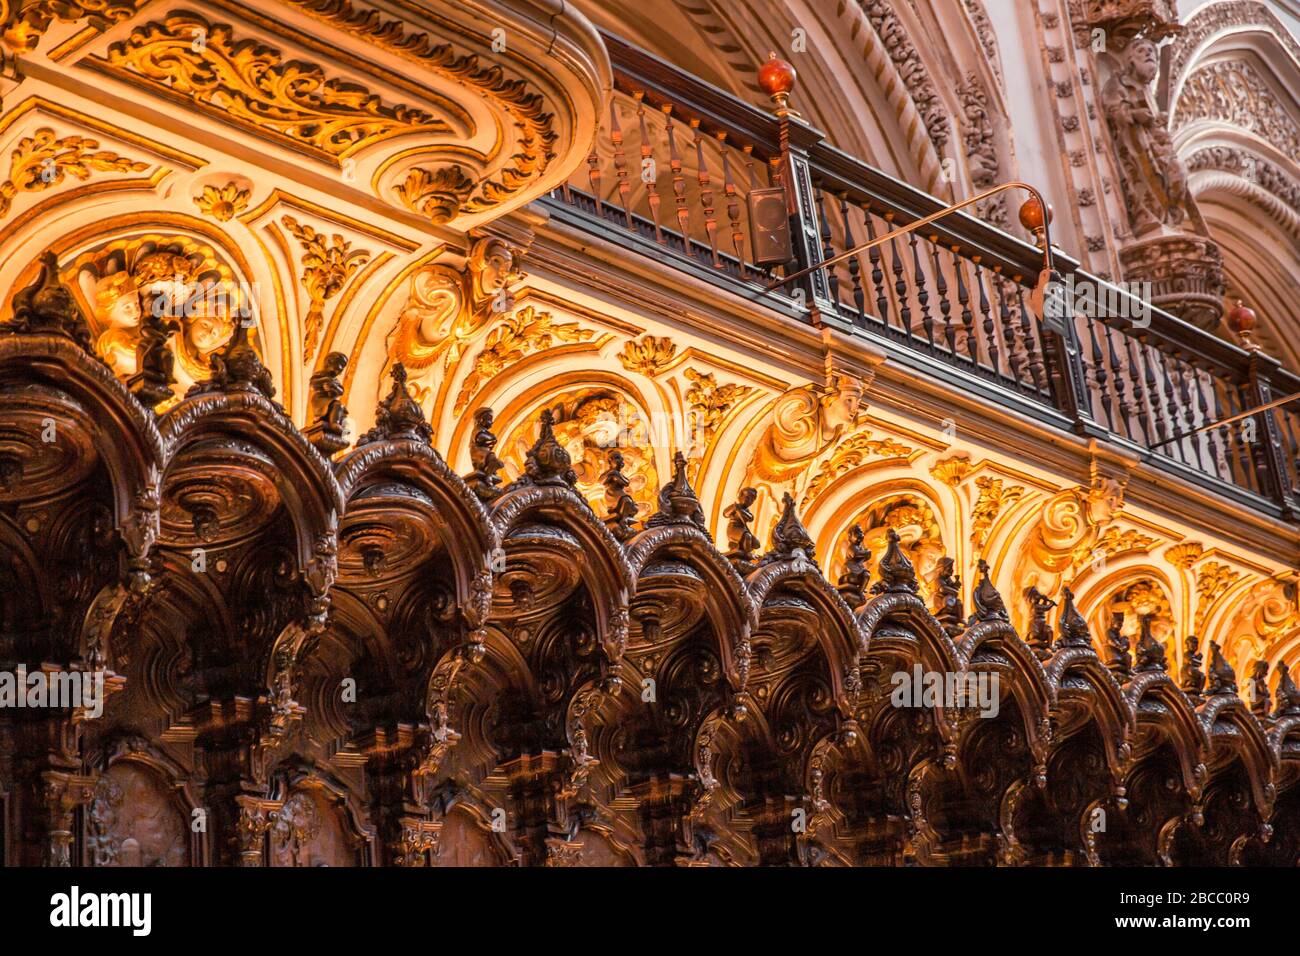 Interior Wooden Choir Stalls of the Mosque Cathedral (Mezquita Catedral) of Cordoba, Andalusia Stock Photo